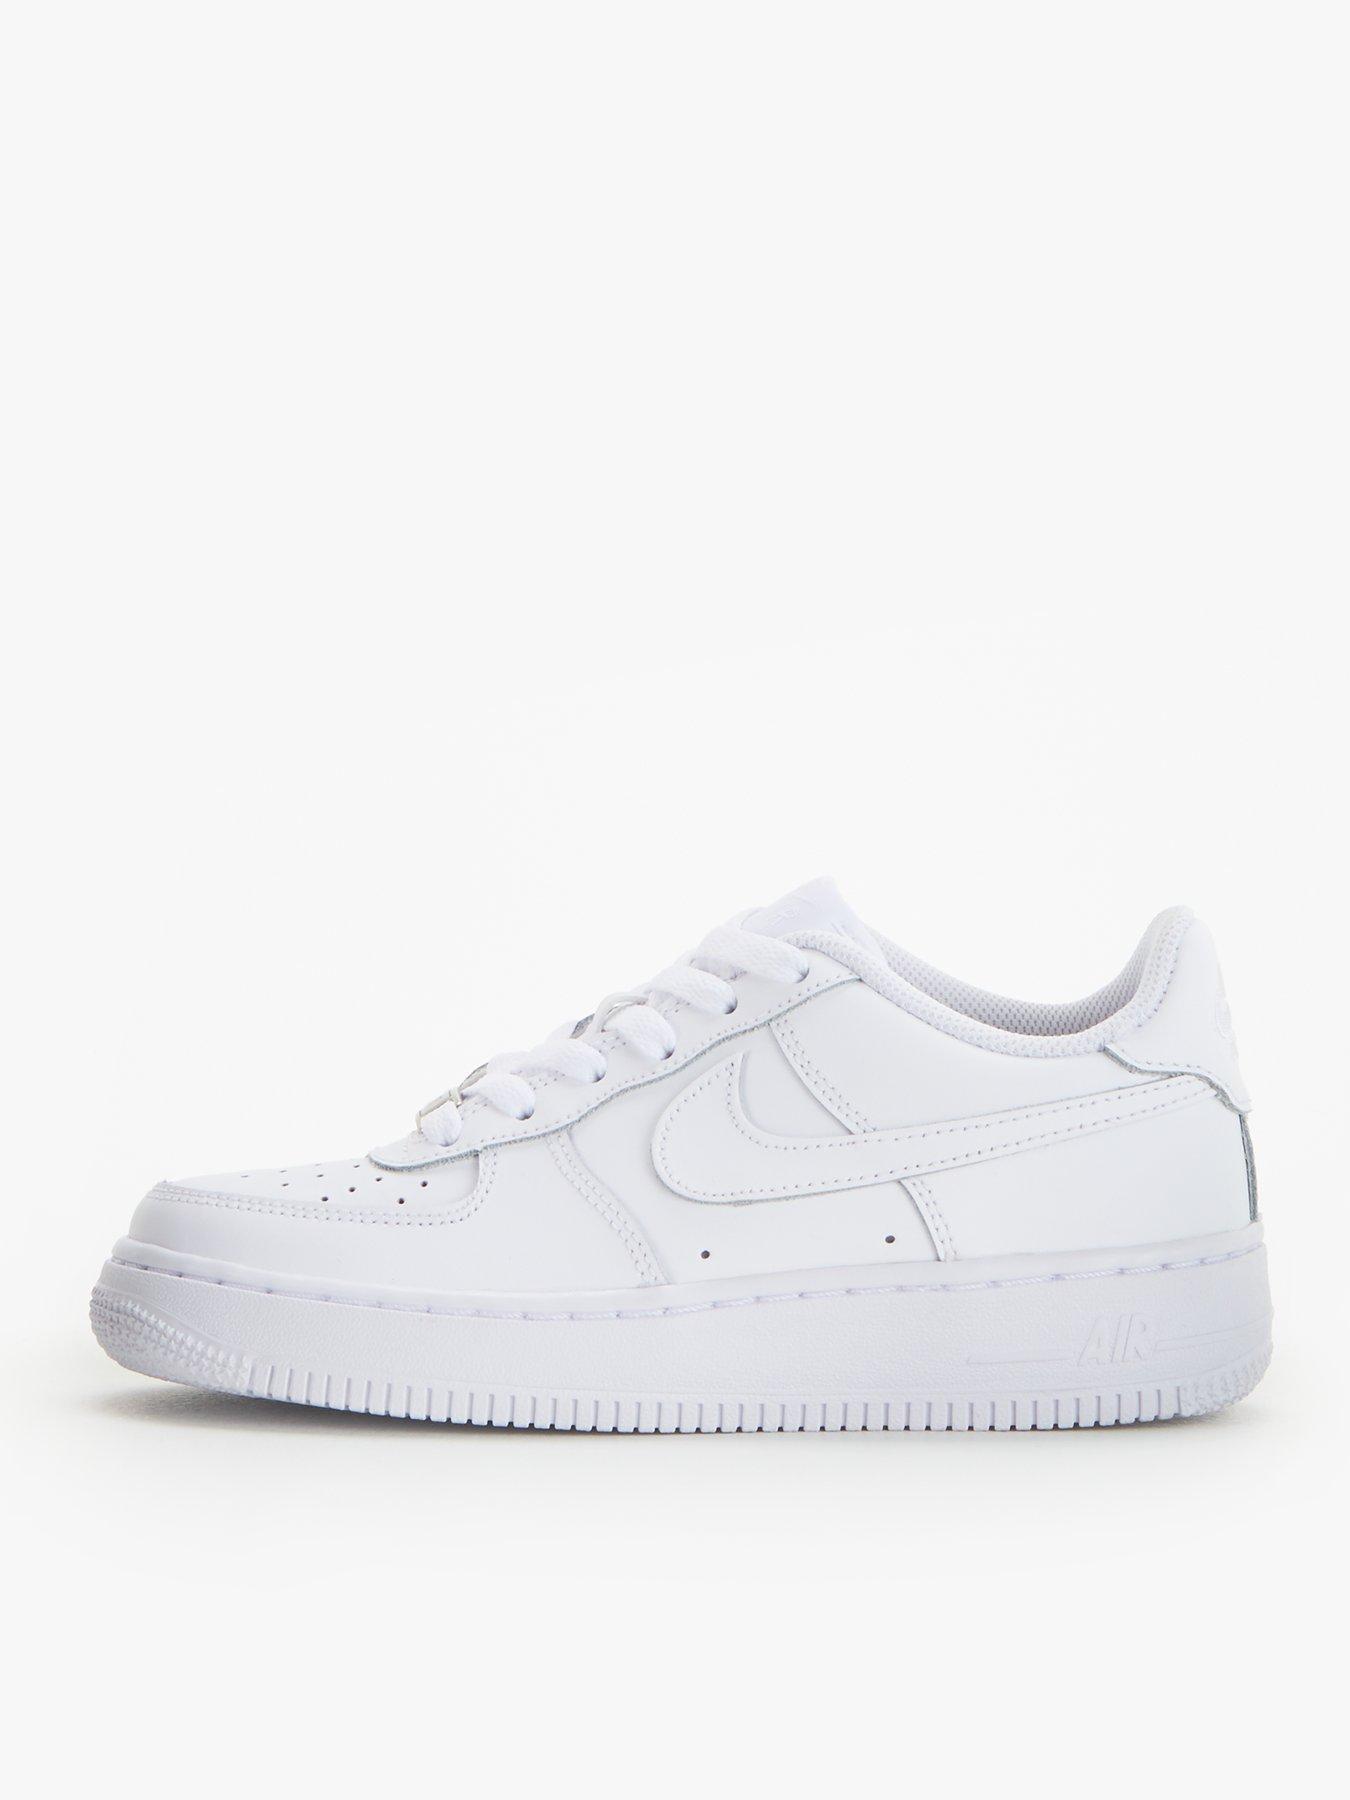 white air force 1 junior size 5